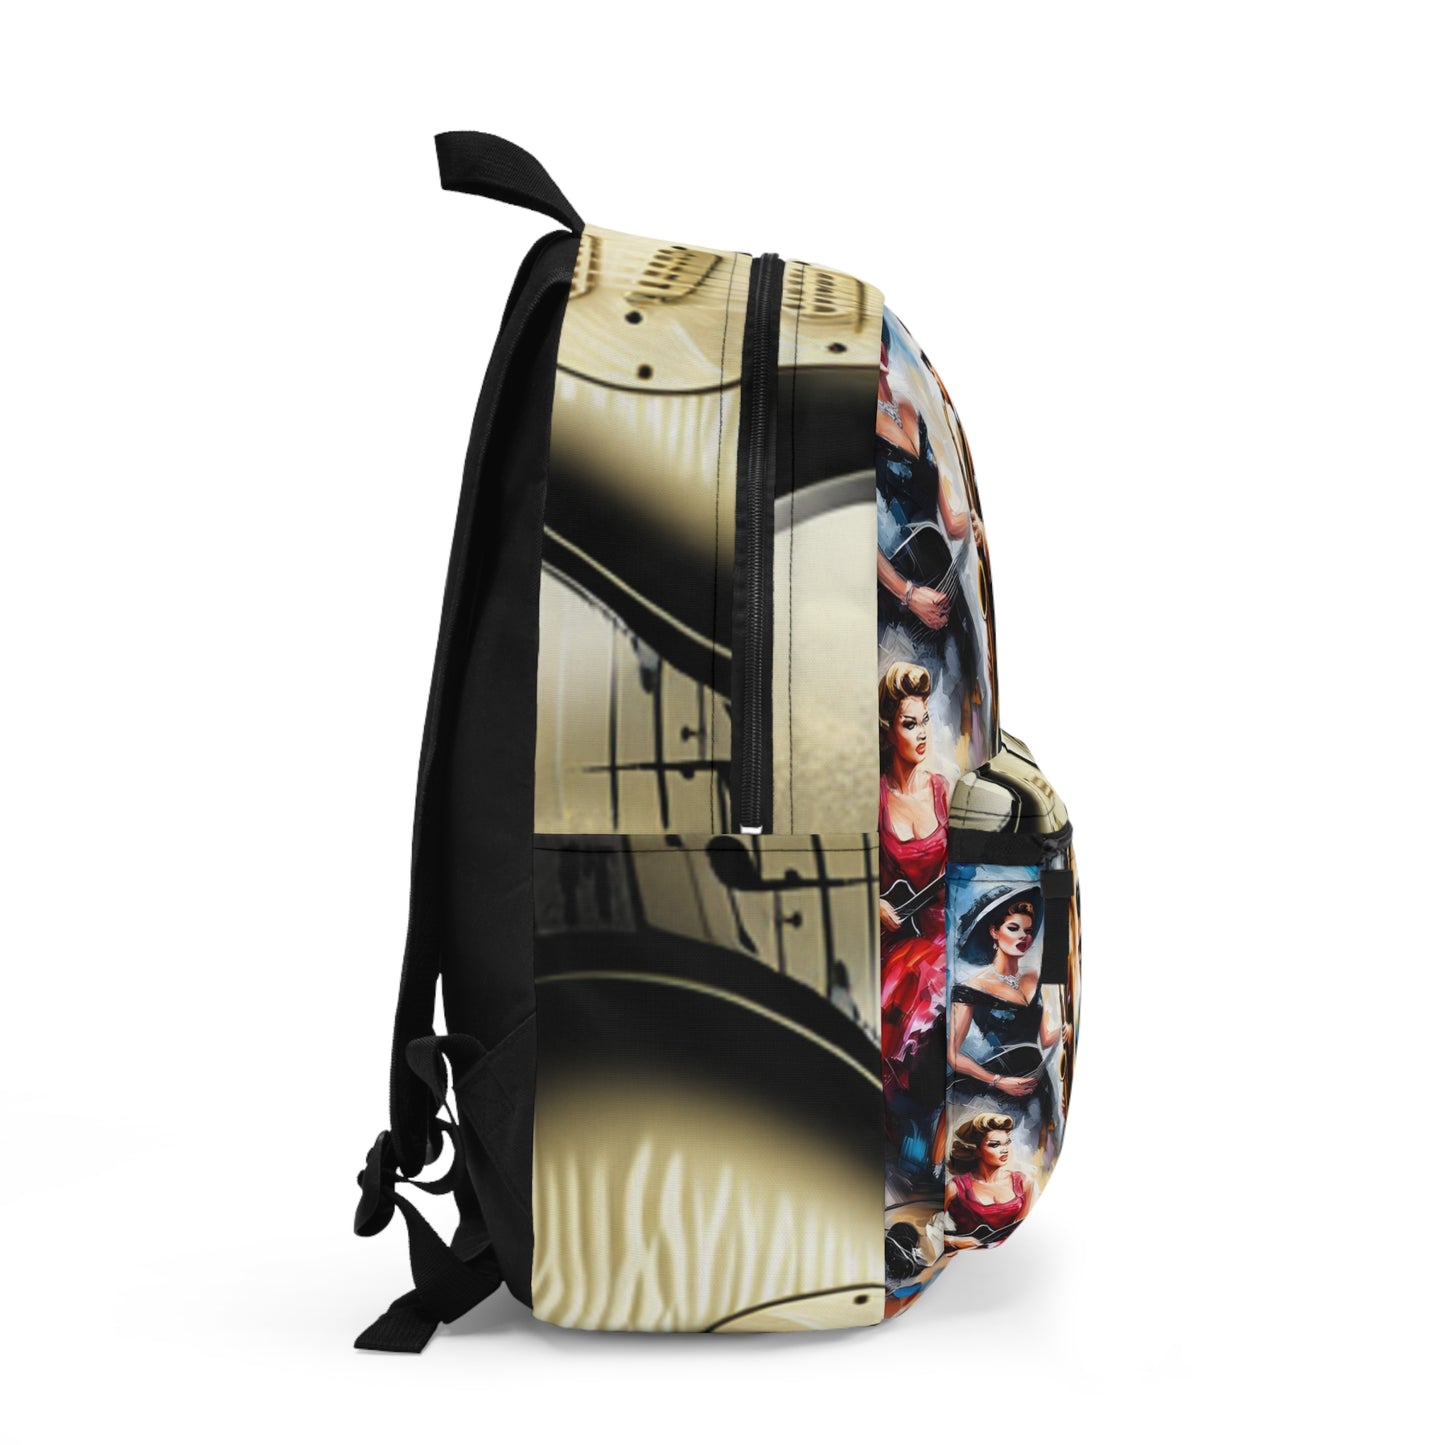 The Day the Music Died 65th Anniversary Backpack